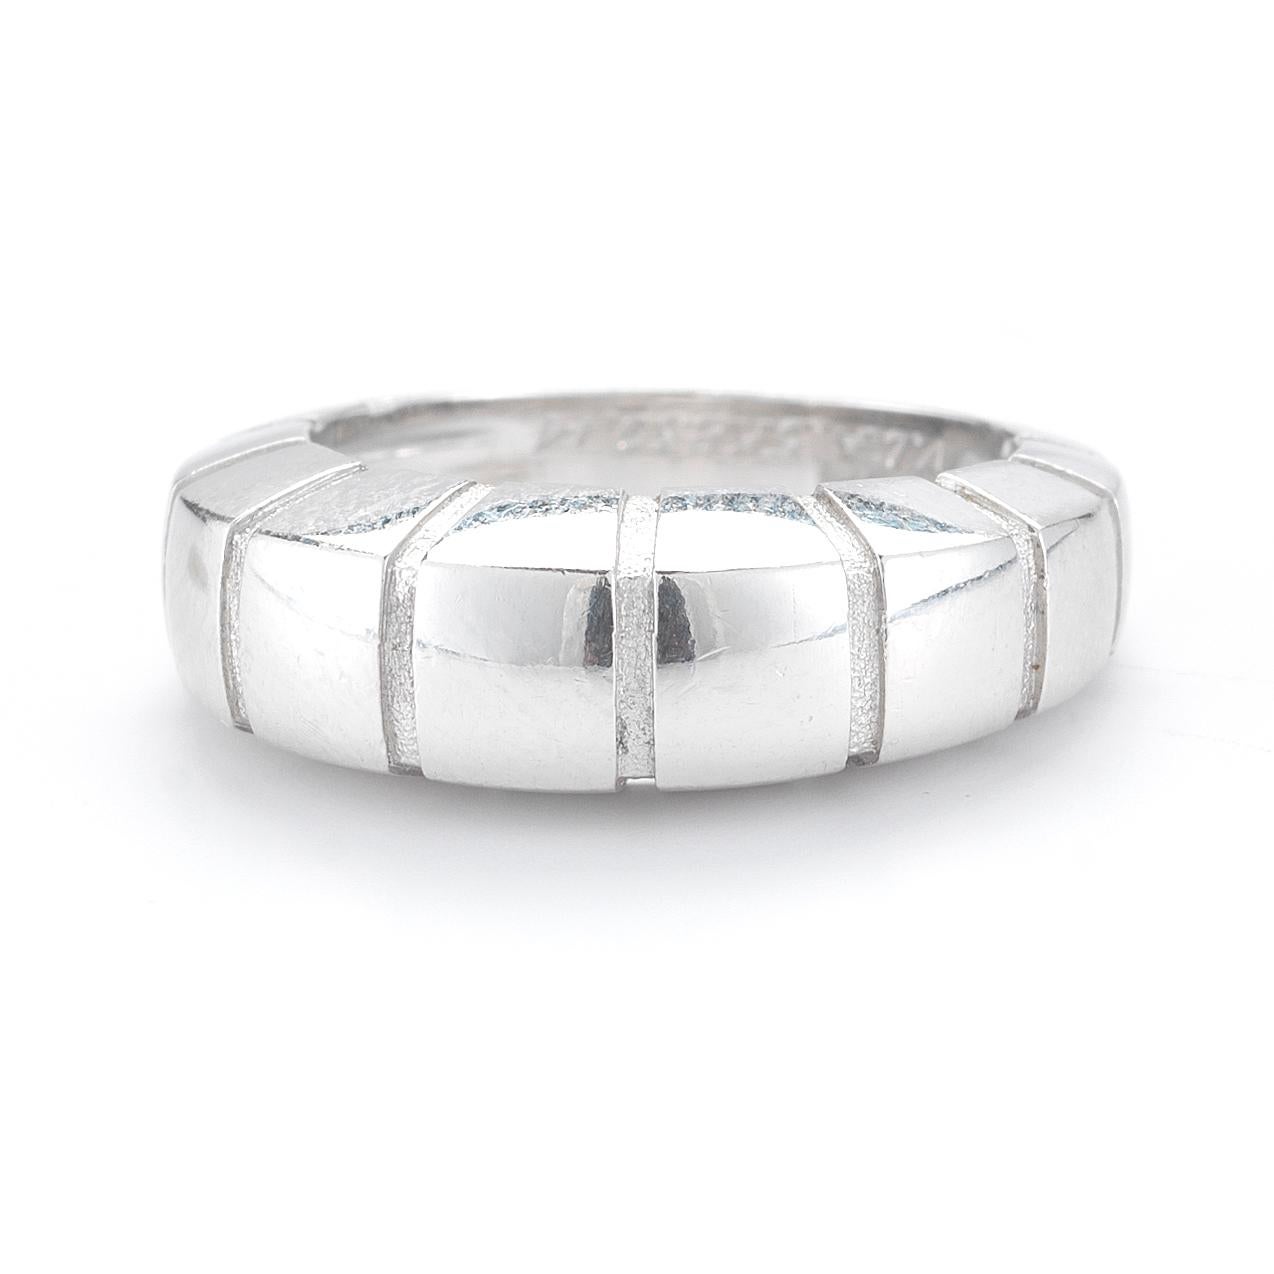 An 18 karat white gold band style ring is banded in curved cubic sections, signed and numbered VCA 5K830.14, finger size 4.5, width 6.6 mm. French Hallmarks.